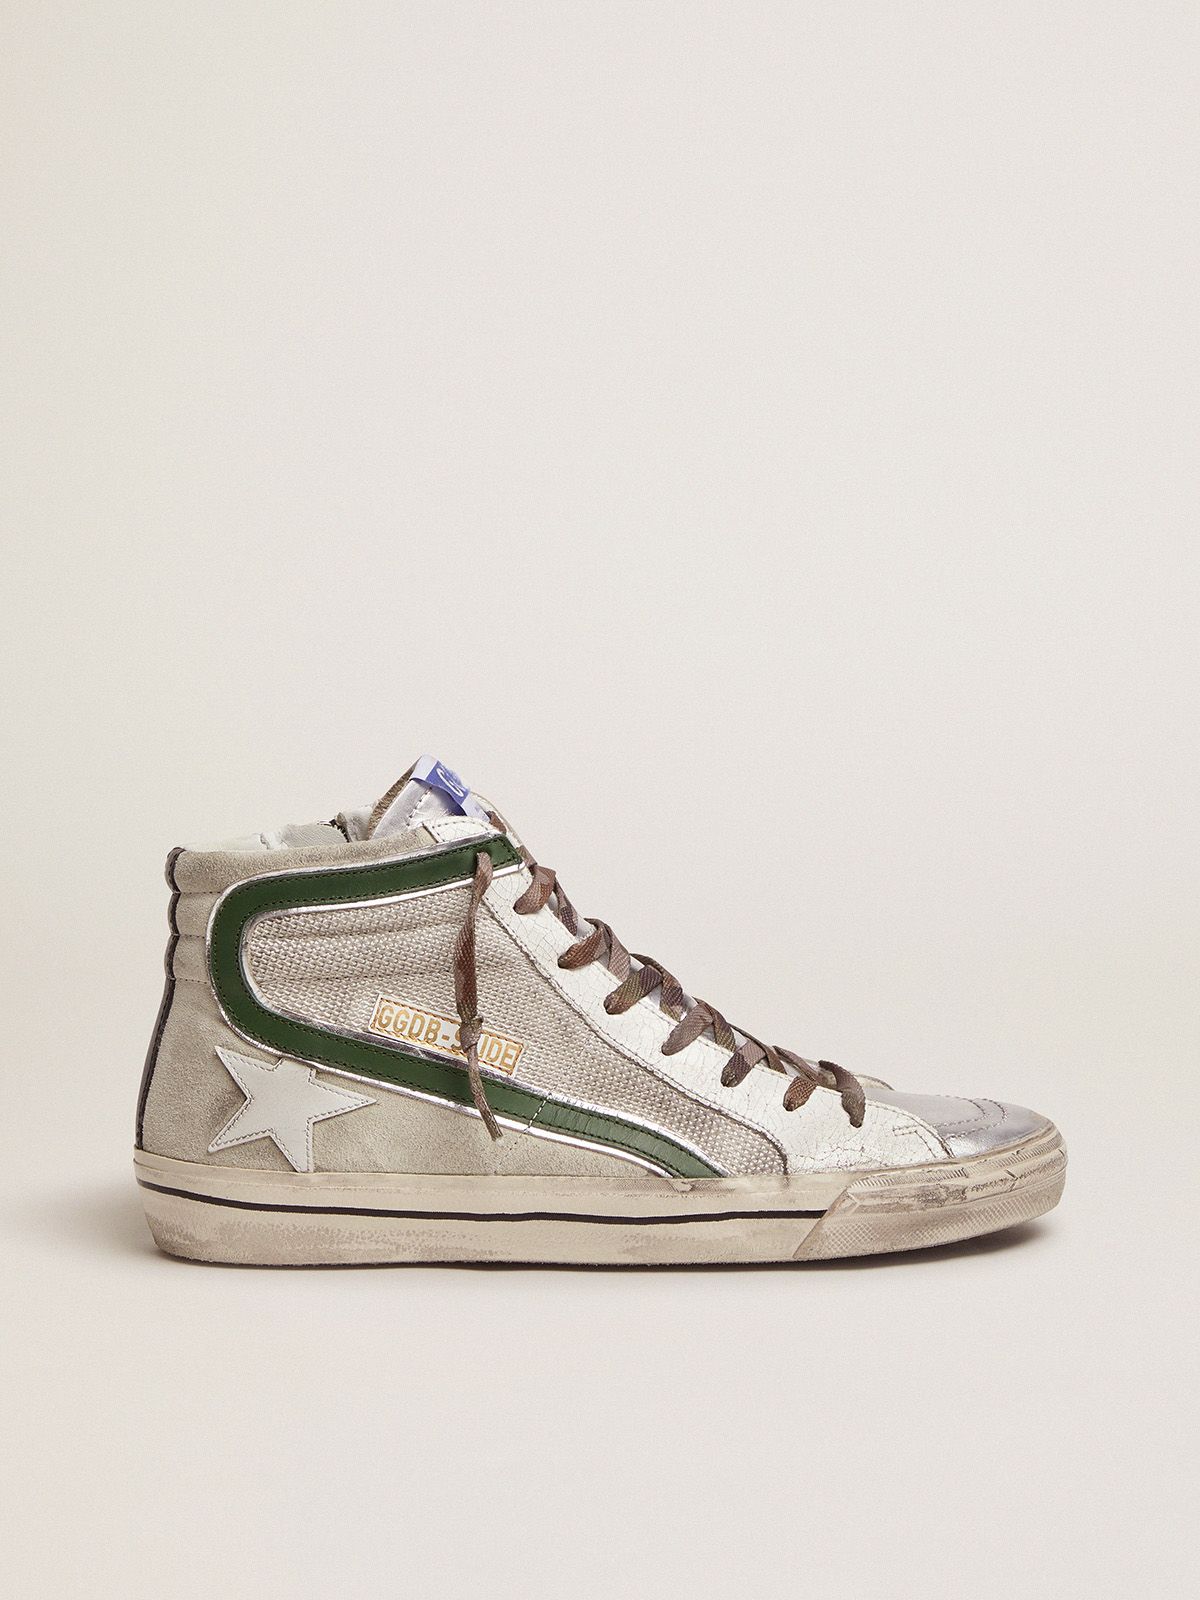 golden goose and flash Slide leather with LTD in green sneakers mesh